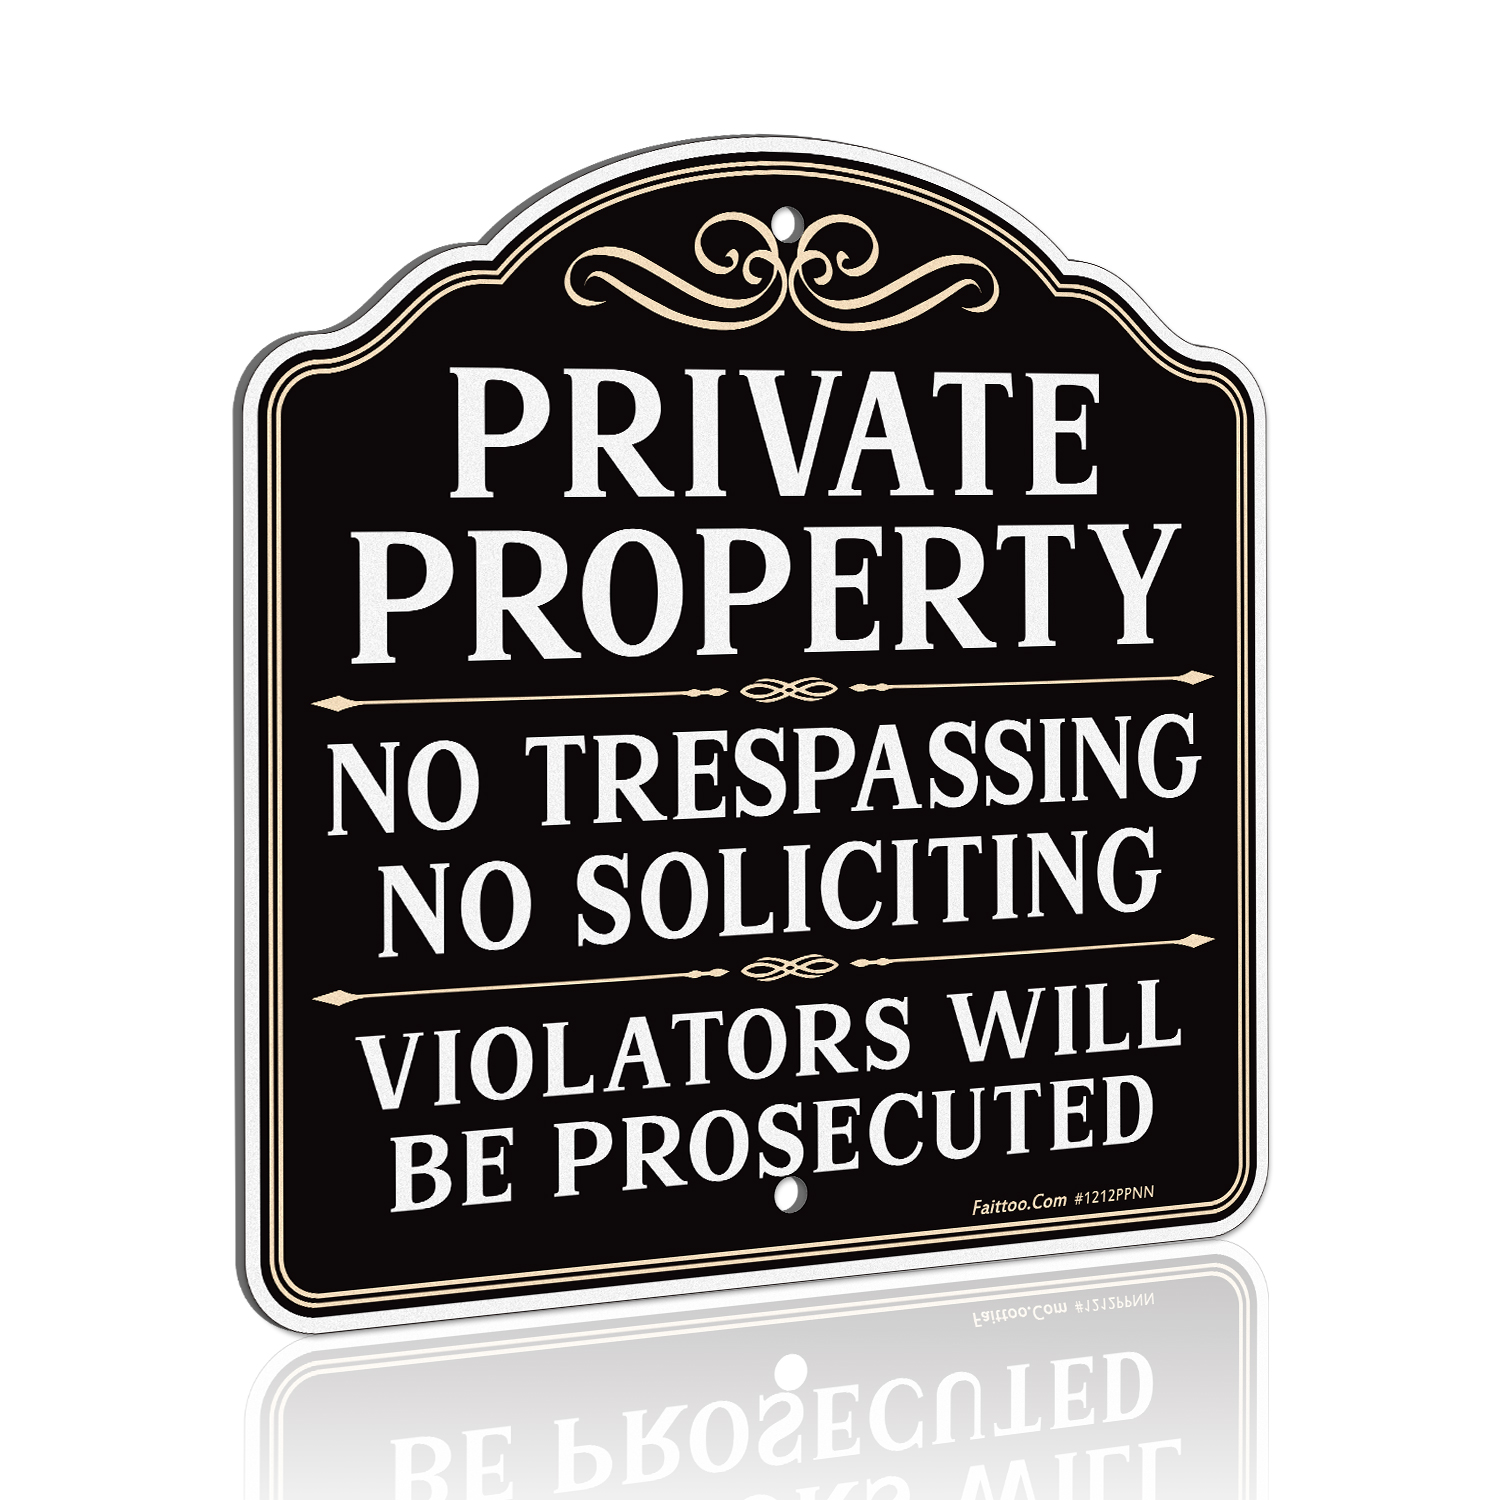 Faittoo Private Property No Trespassing No Soliciting Sign, Violators Will Be Prosecuted Sign, 11.6 x 11.6 Inch Reflective Aluminum, UV Protected, Weather/Fade Resistant, Easy to Install